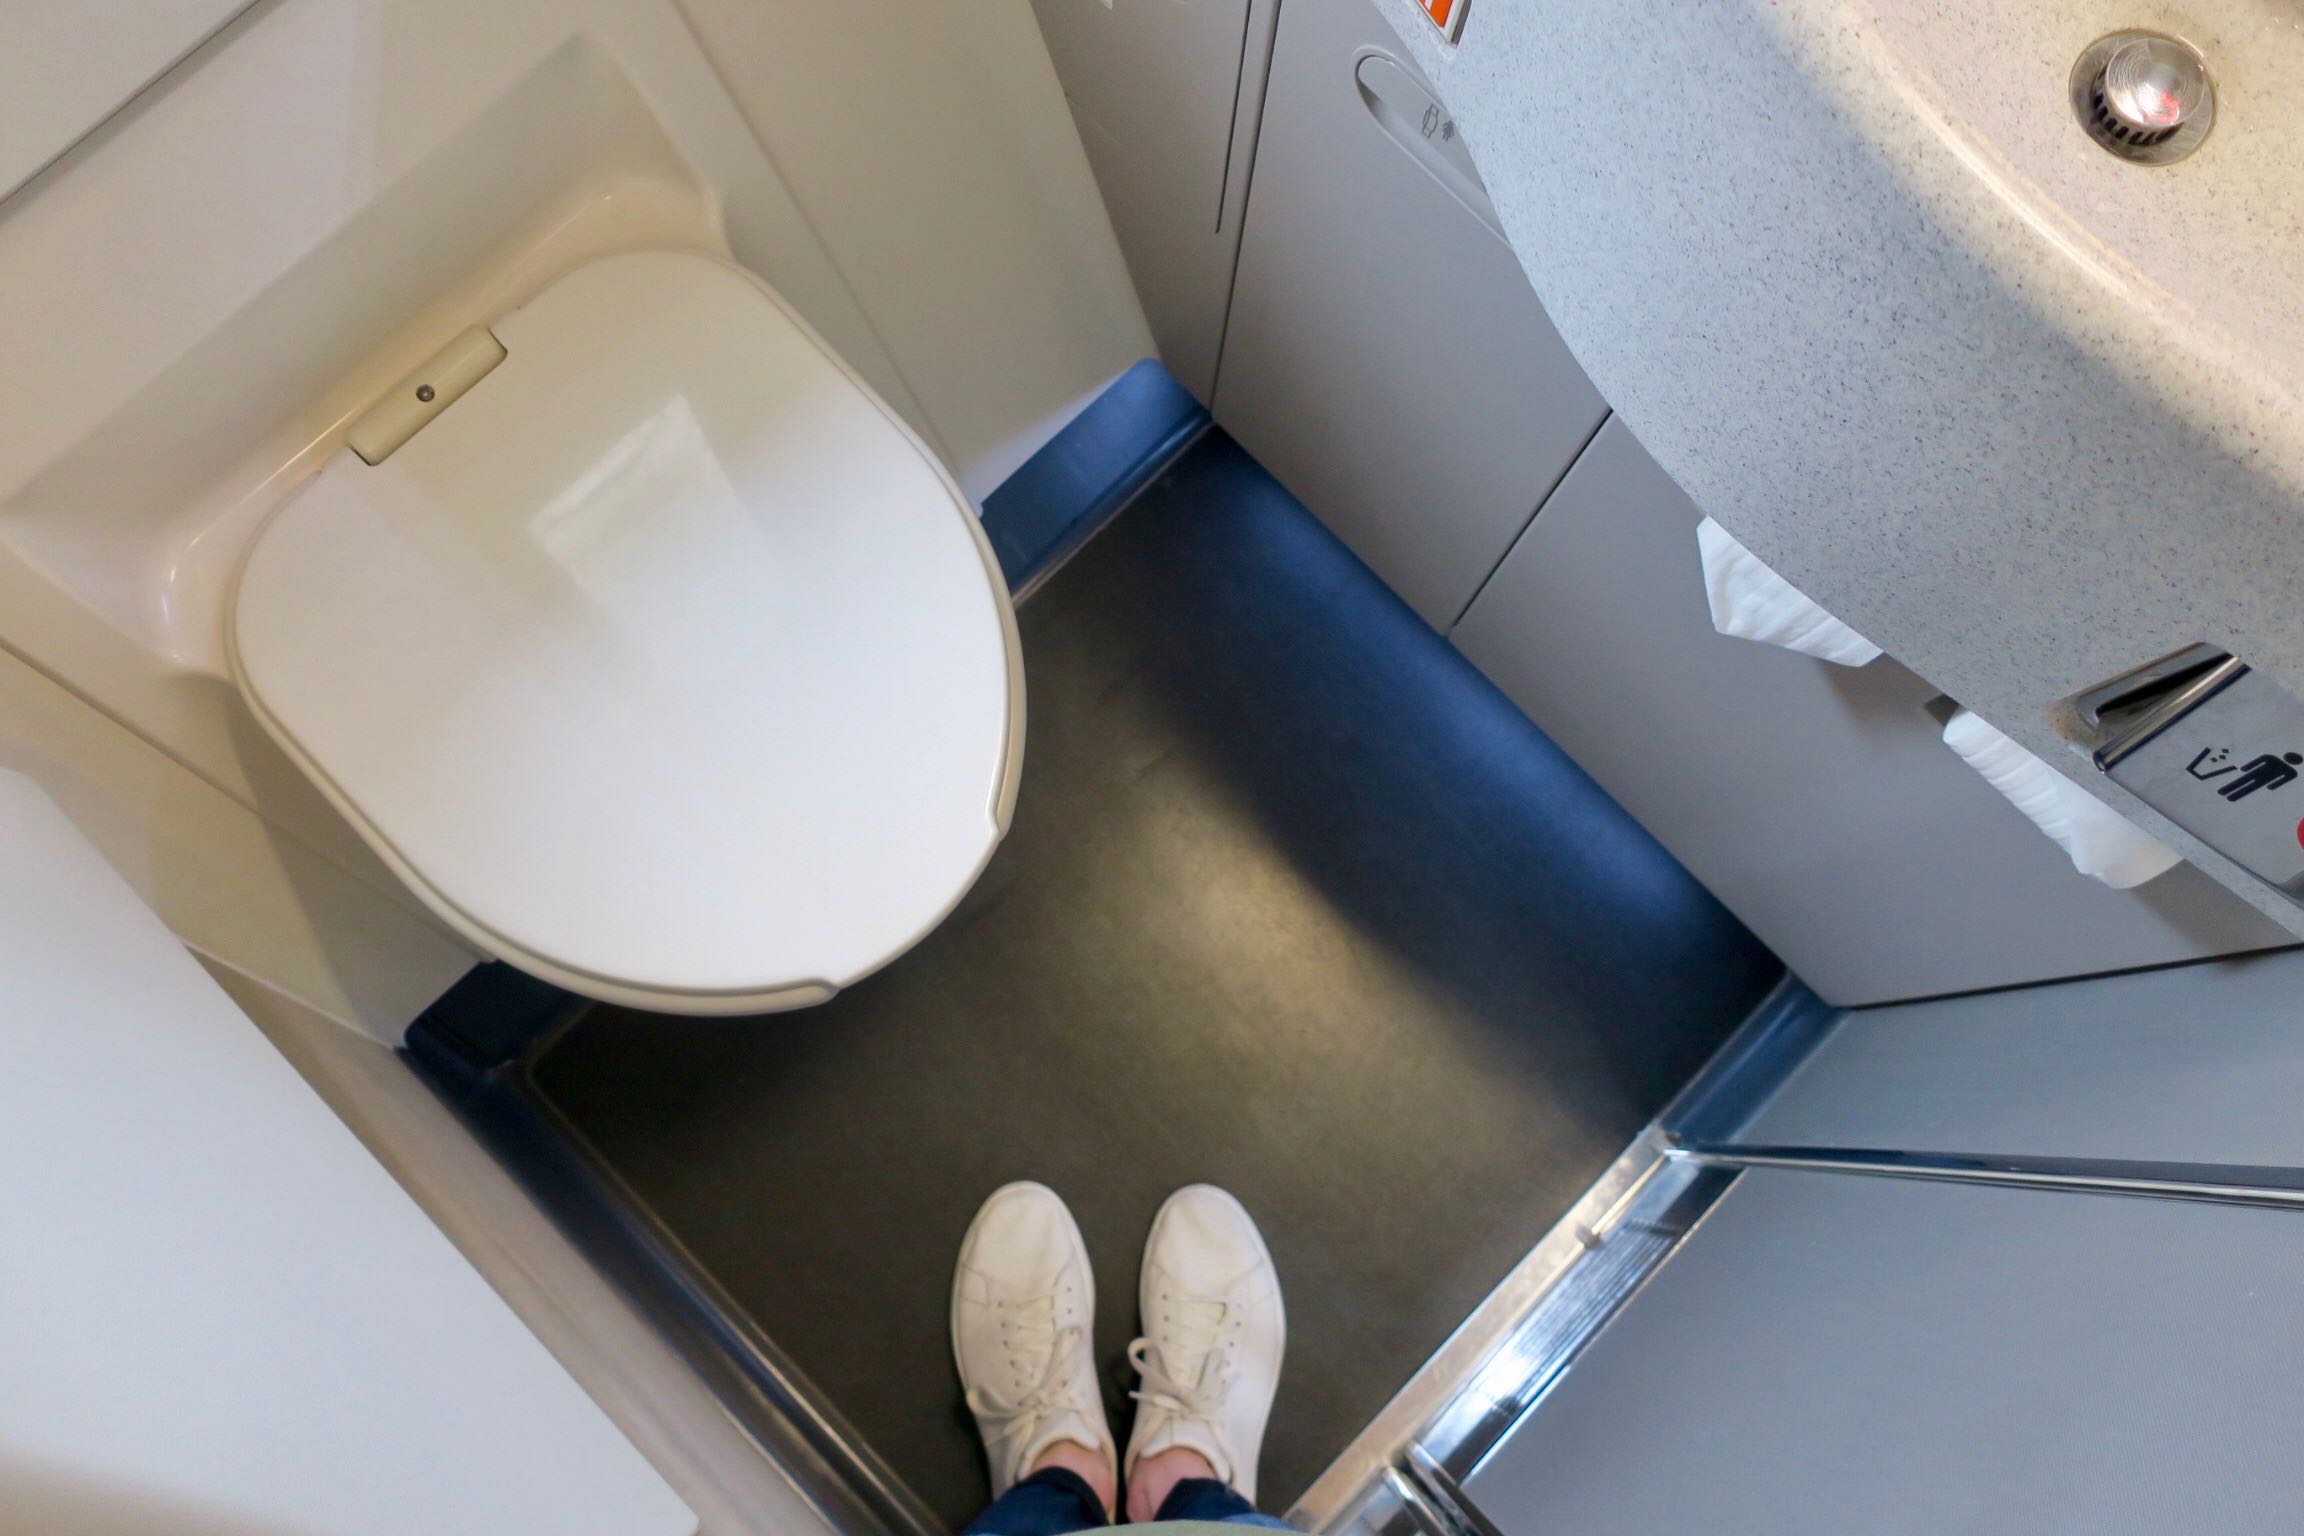 China Airlines Business Class lavatory